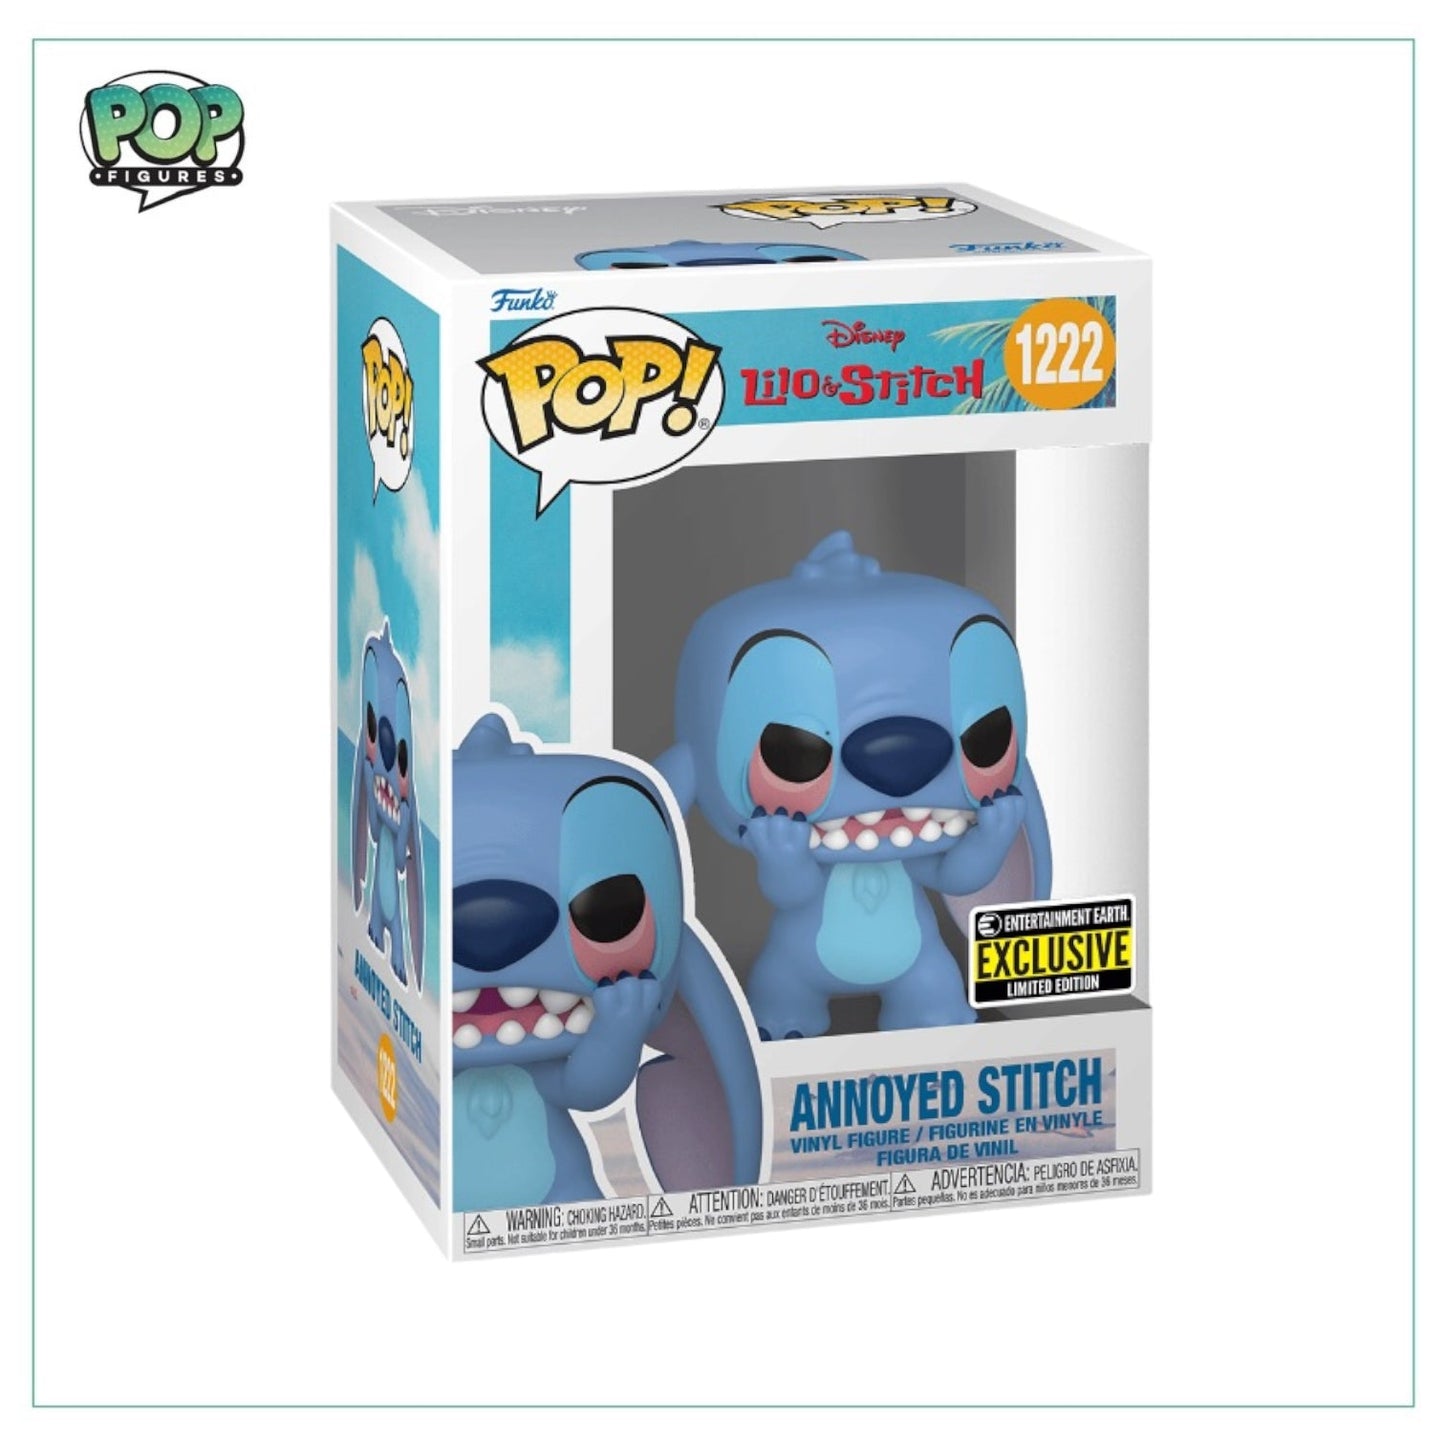 Annoyed Stitch #1222 Funko Pop! - Lilo & Stitch - Entertainment Earth Exclusive - Angry Cat